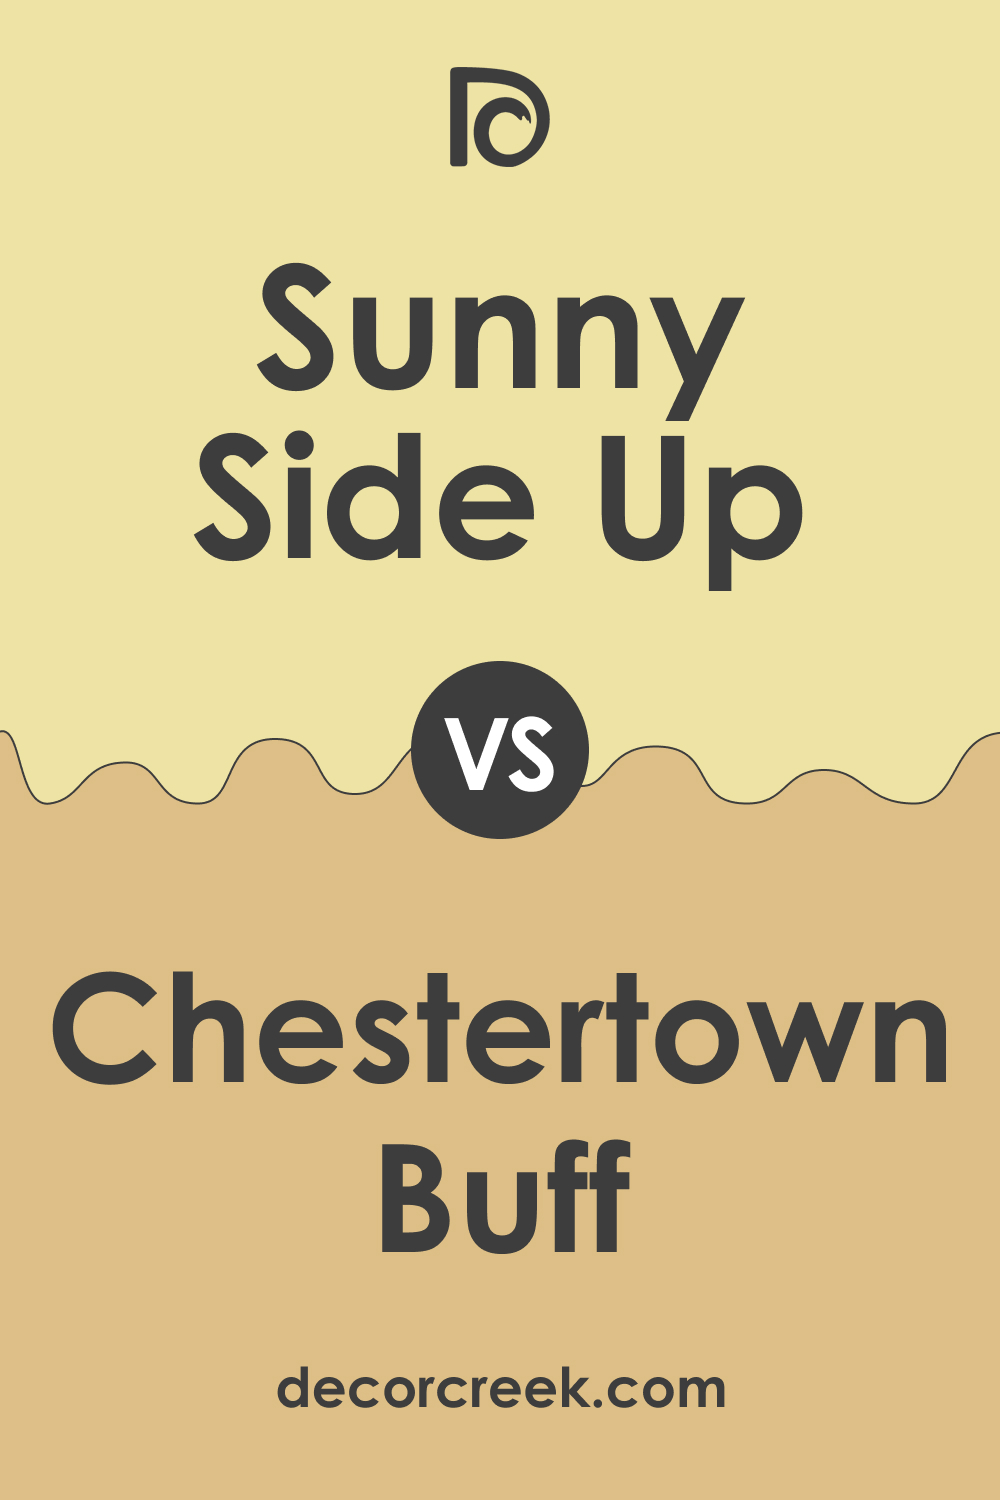 Sunny Side Up 367 vs. HC-9 Chestertown Buff